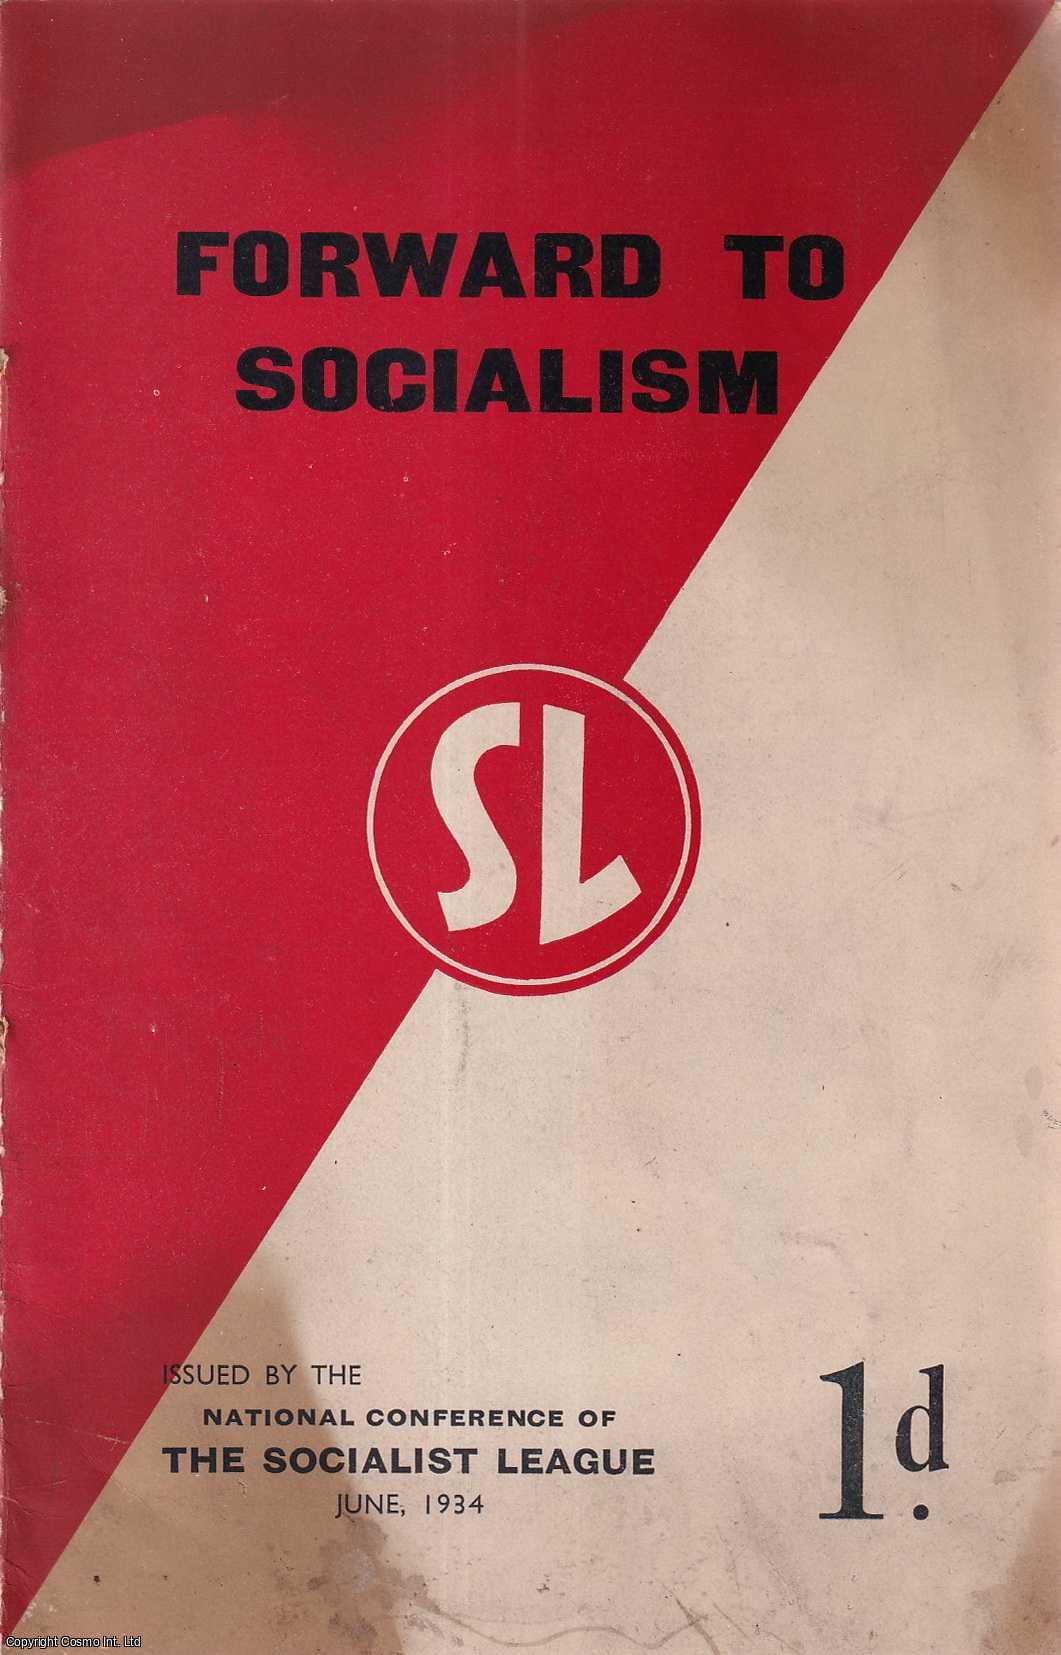 Socialist League - Forward to Socialism. Issued by the National Conference of the Socialist League.